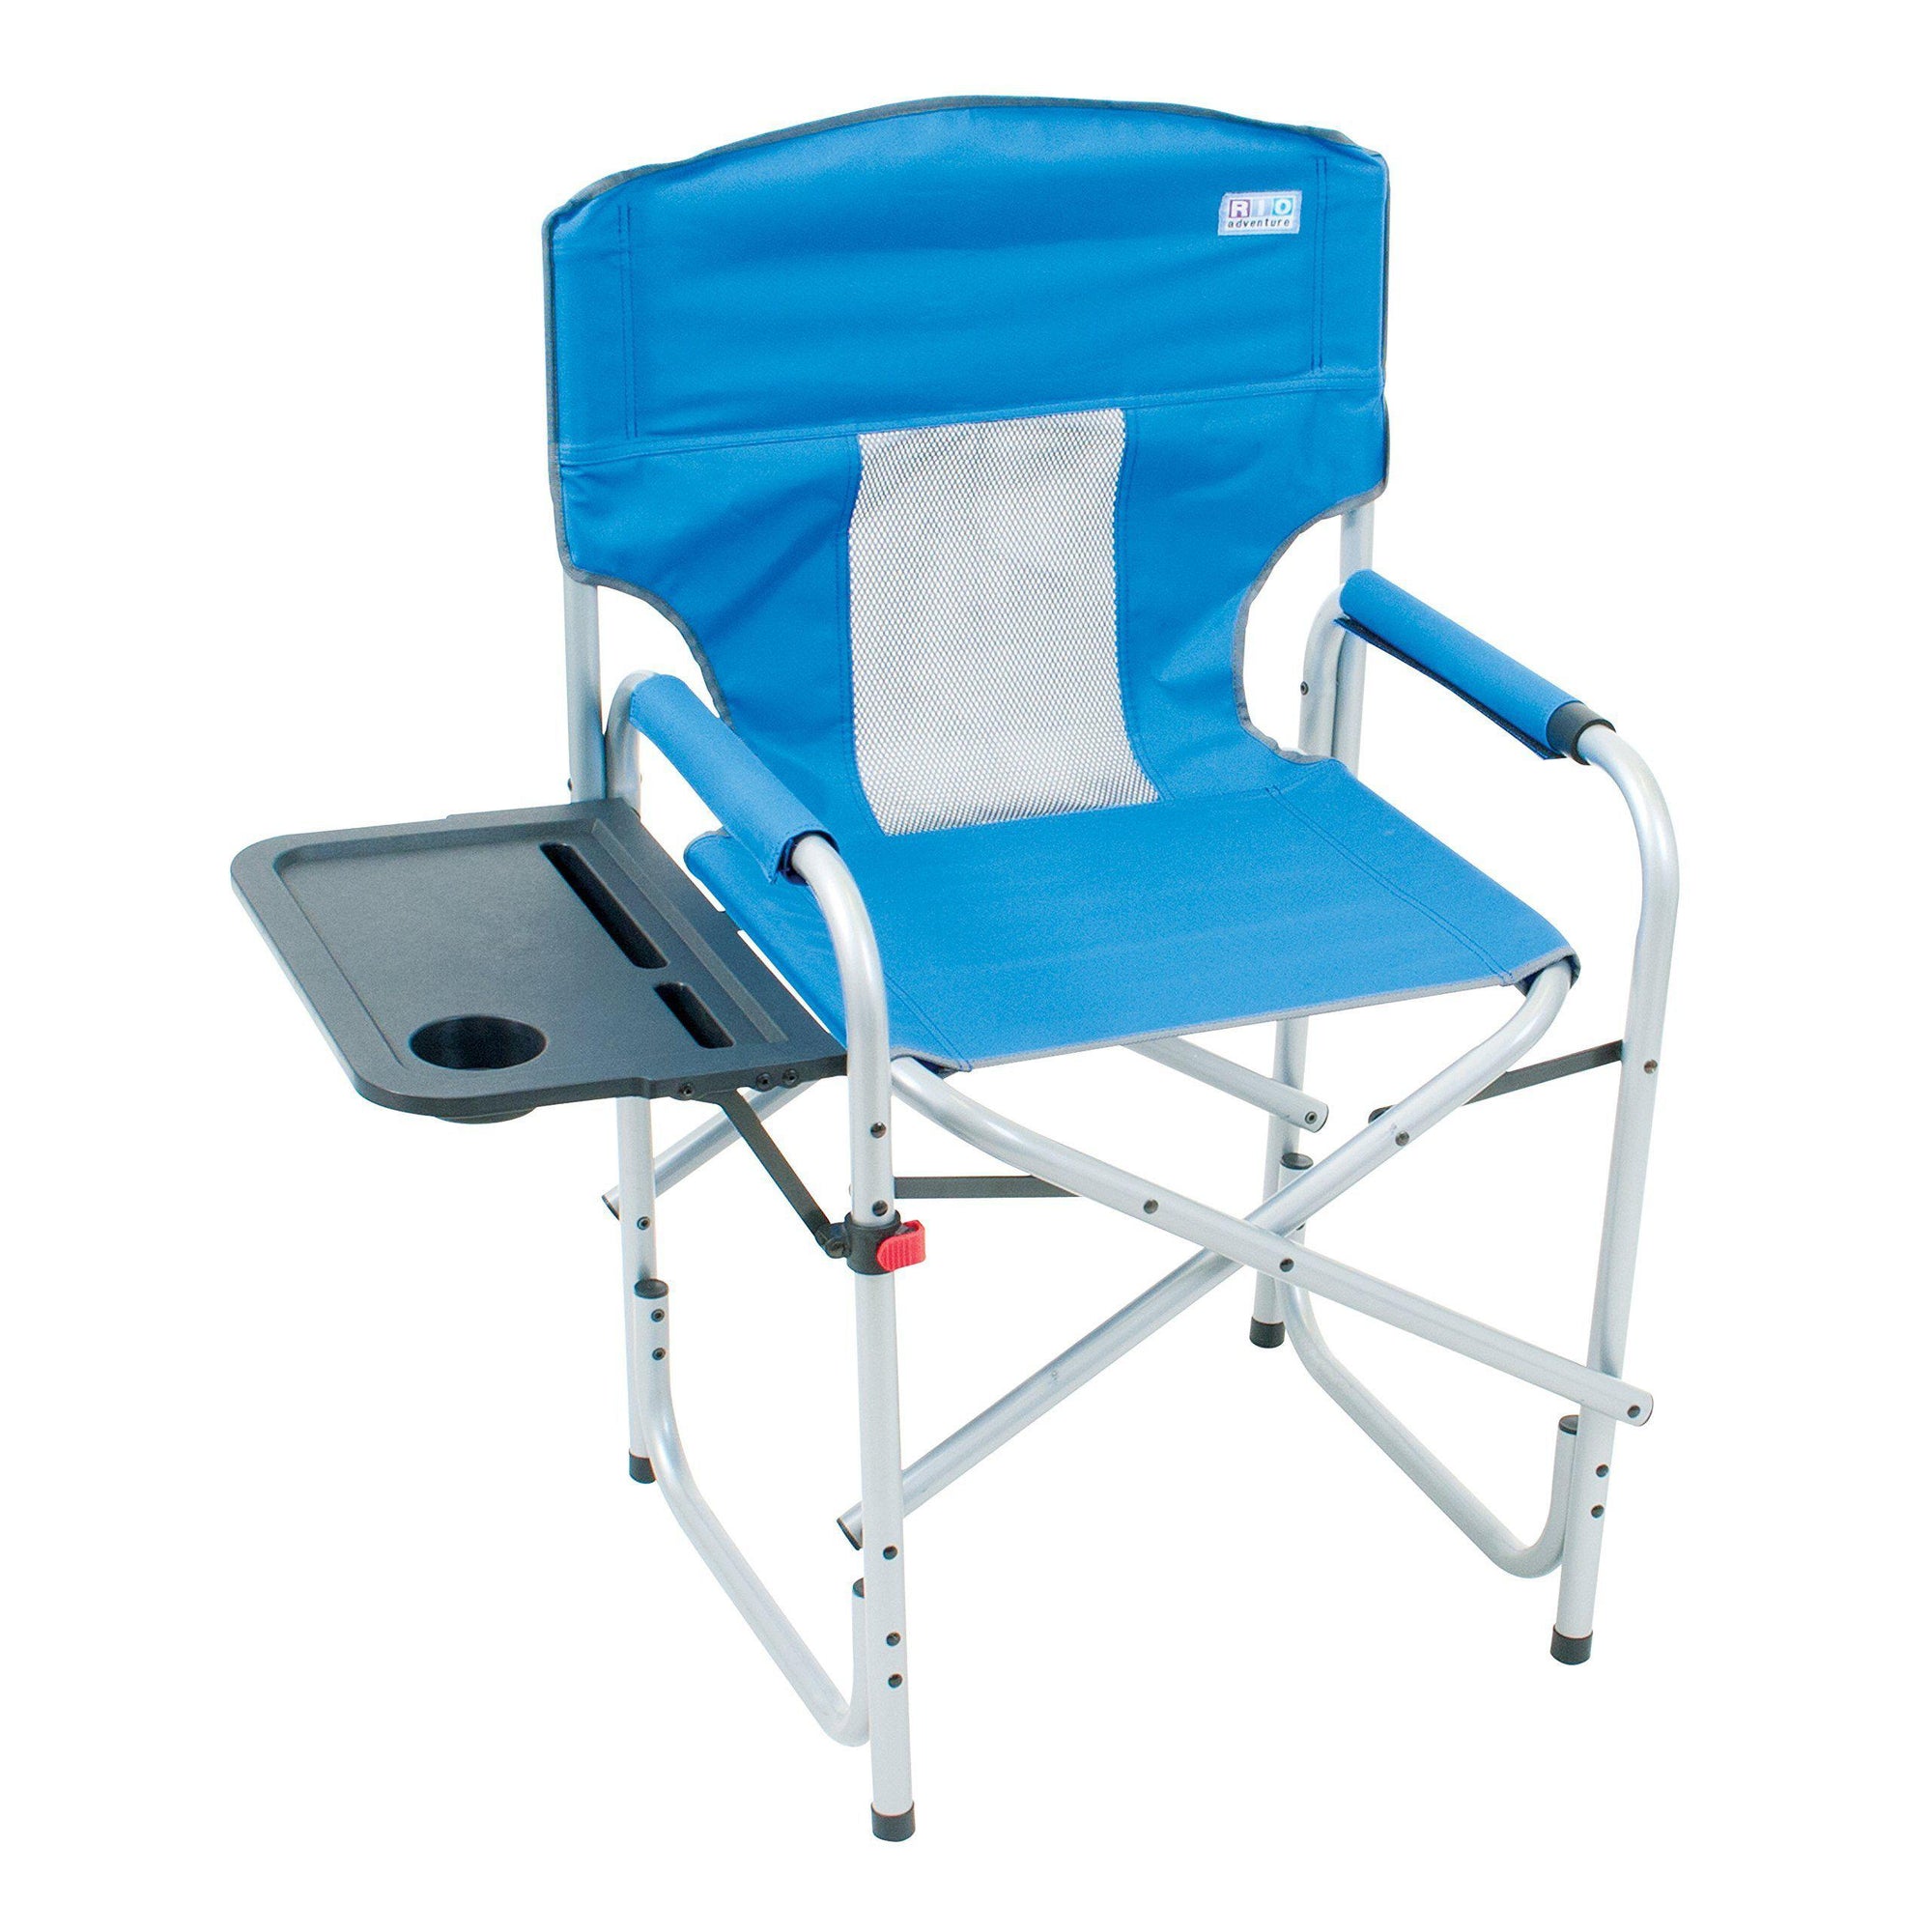 RIO Gear Outdoor Director's Folding Chair with Side Table for Camping